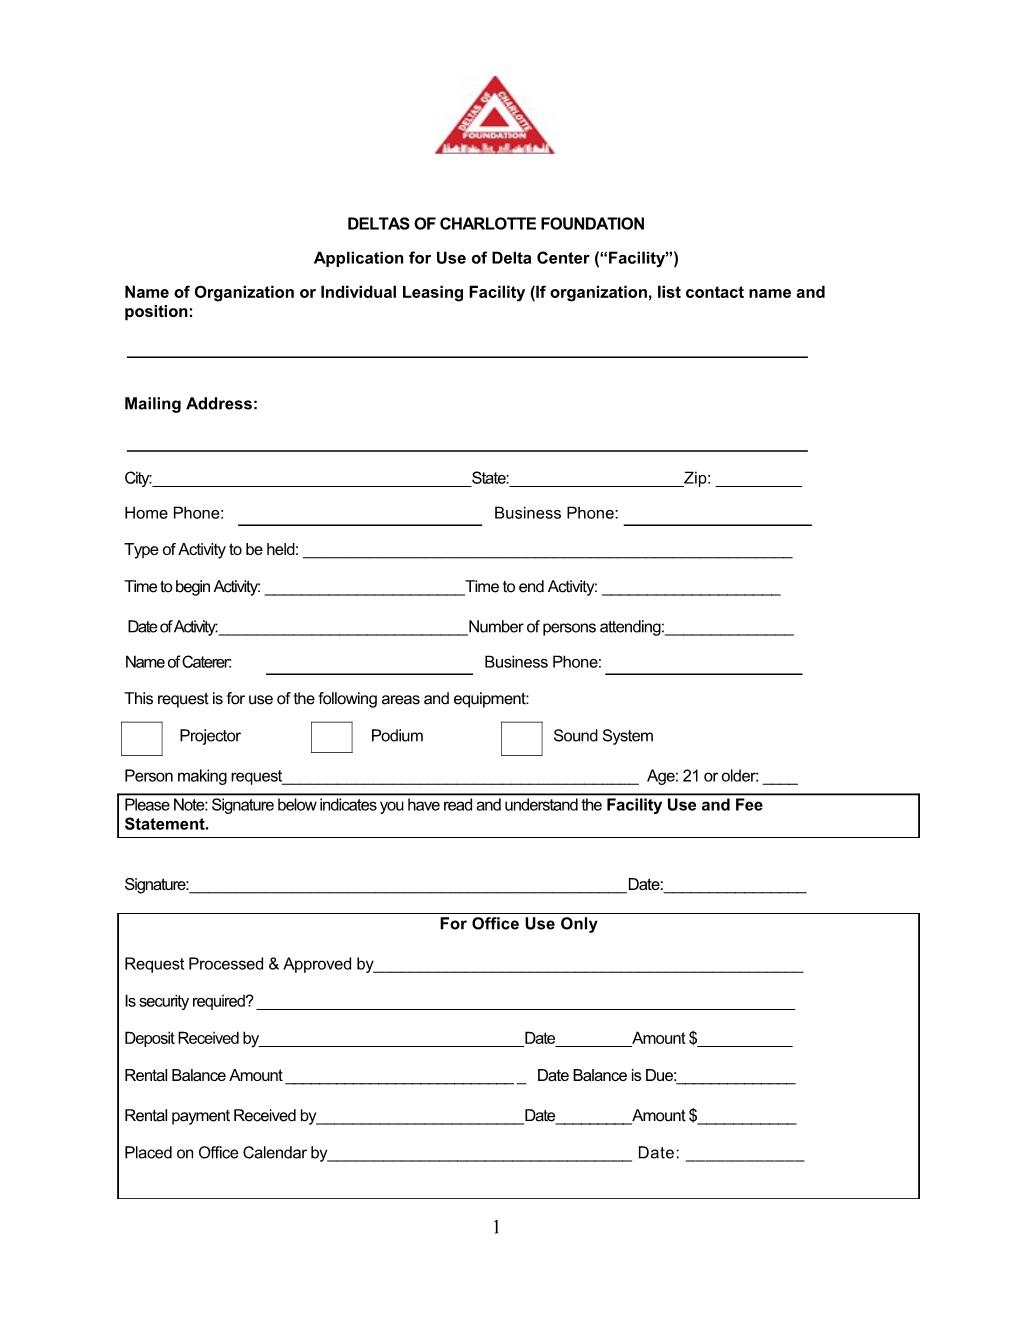 Application for Use of Delta Center ( Facility )